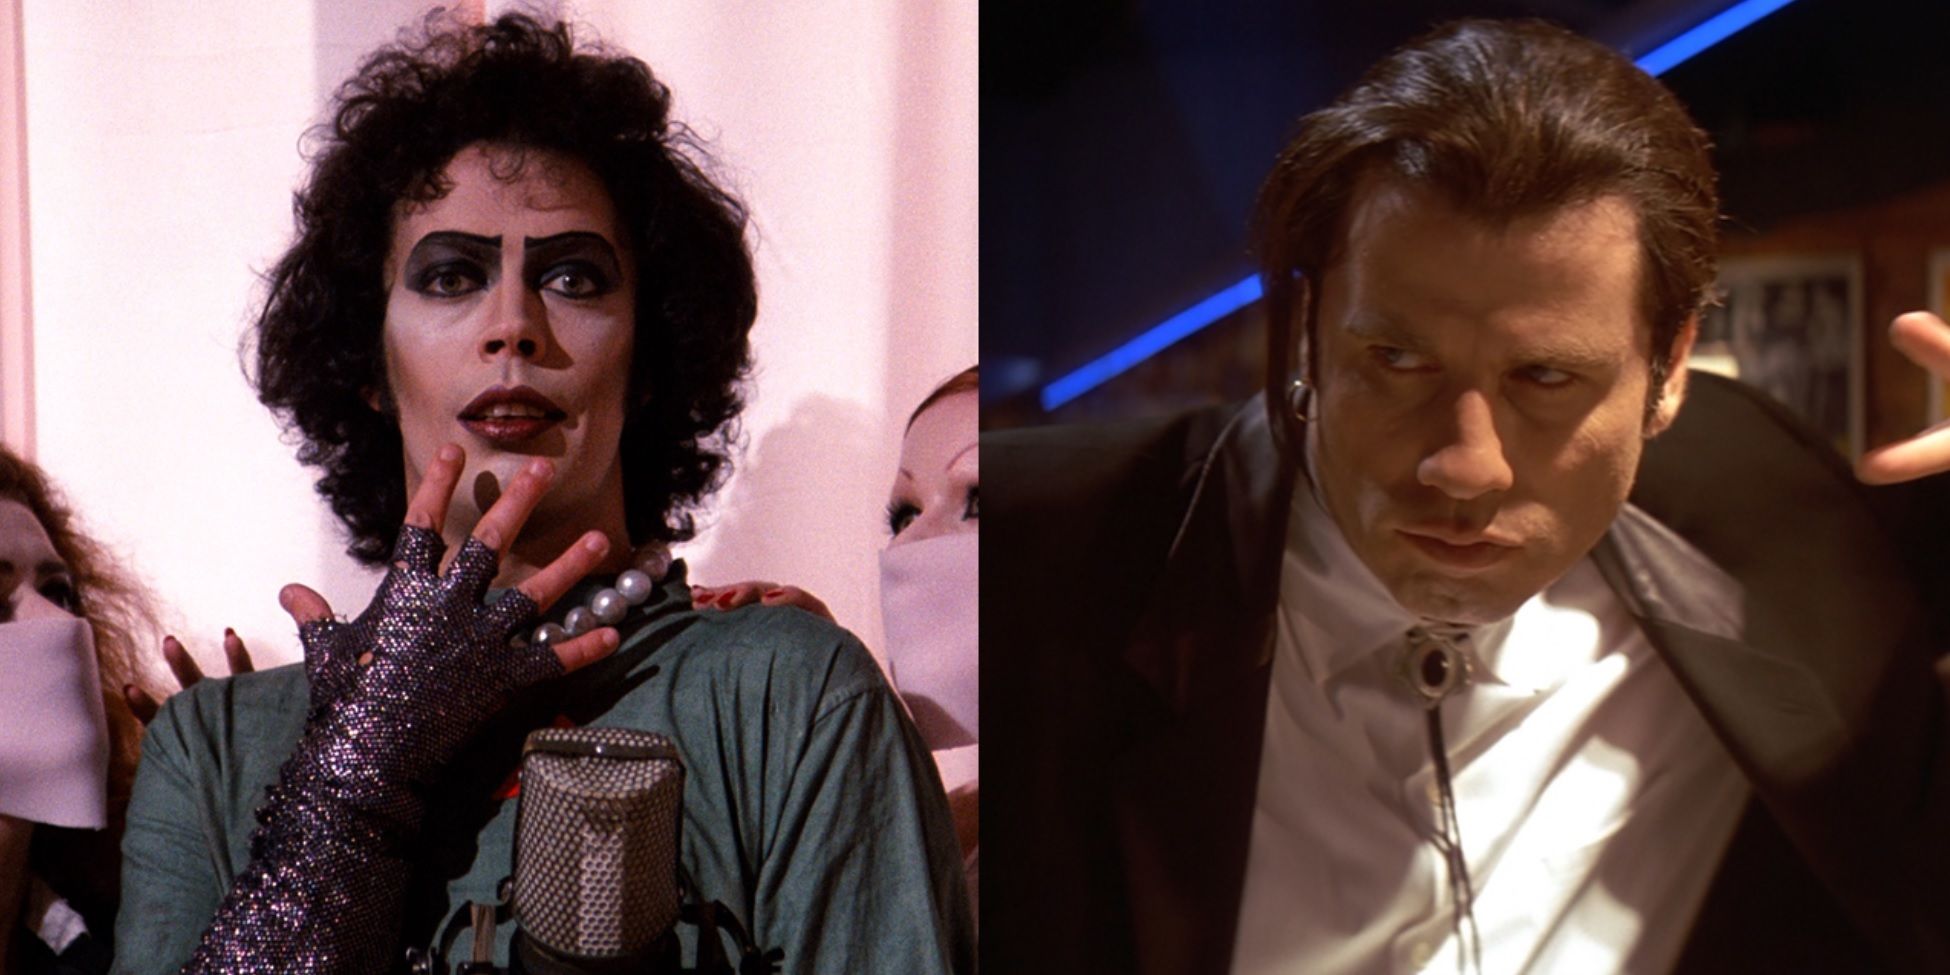 Split image of Tim Curry in The Rocky Horror Picture Show and John Travolta in Pulp Fiction